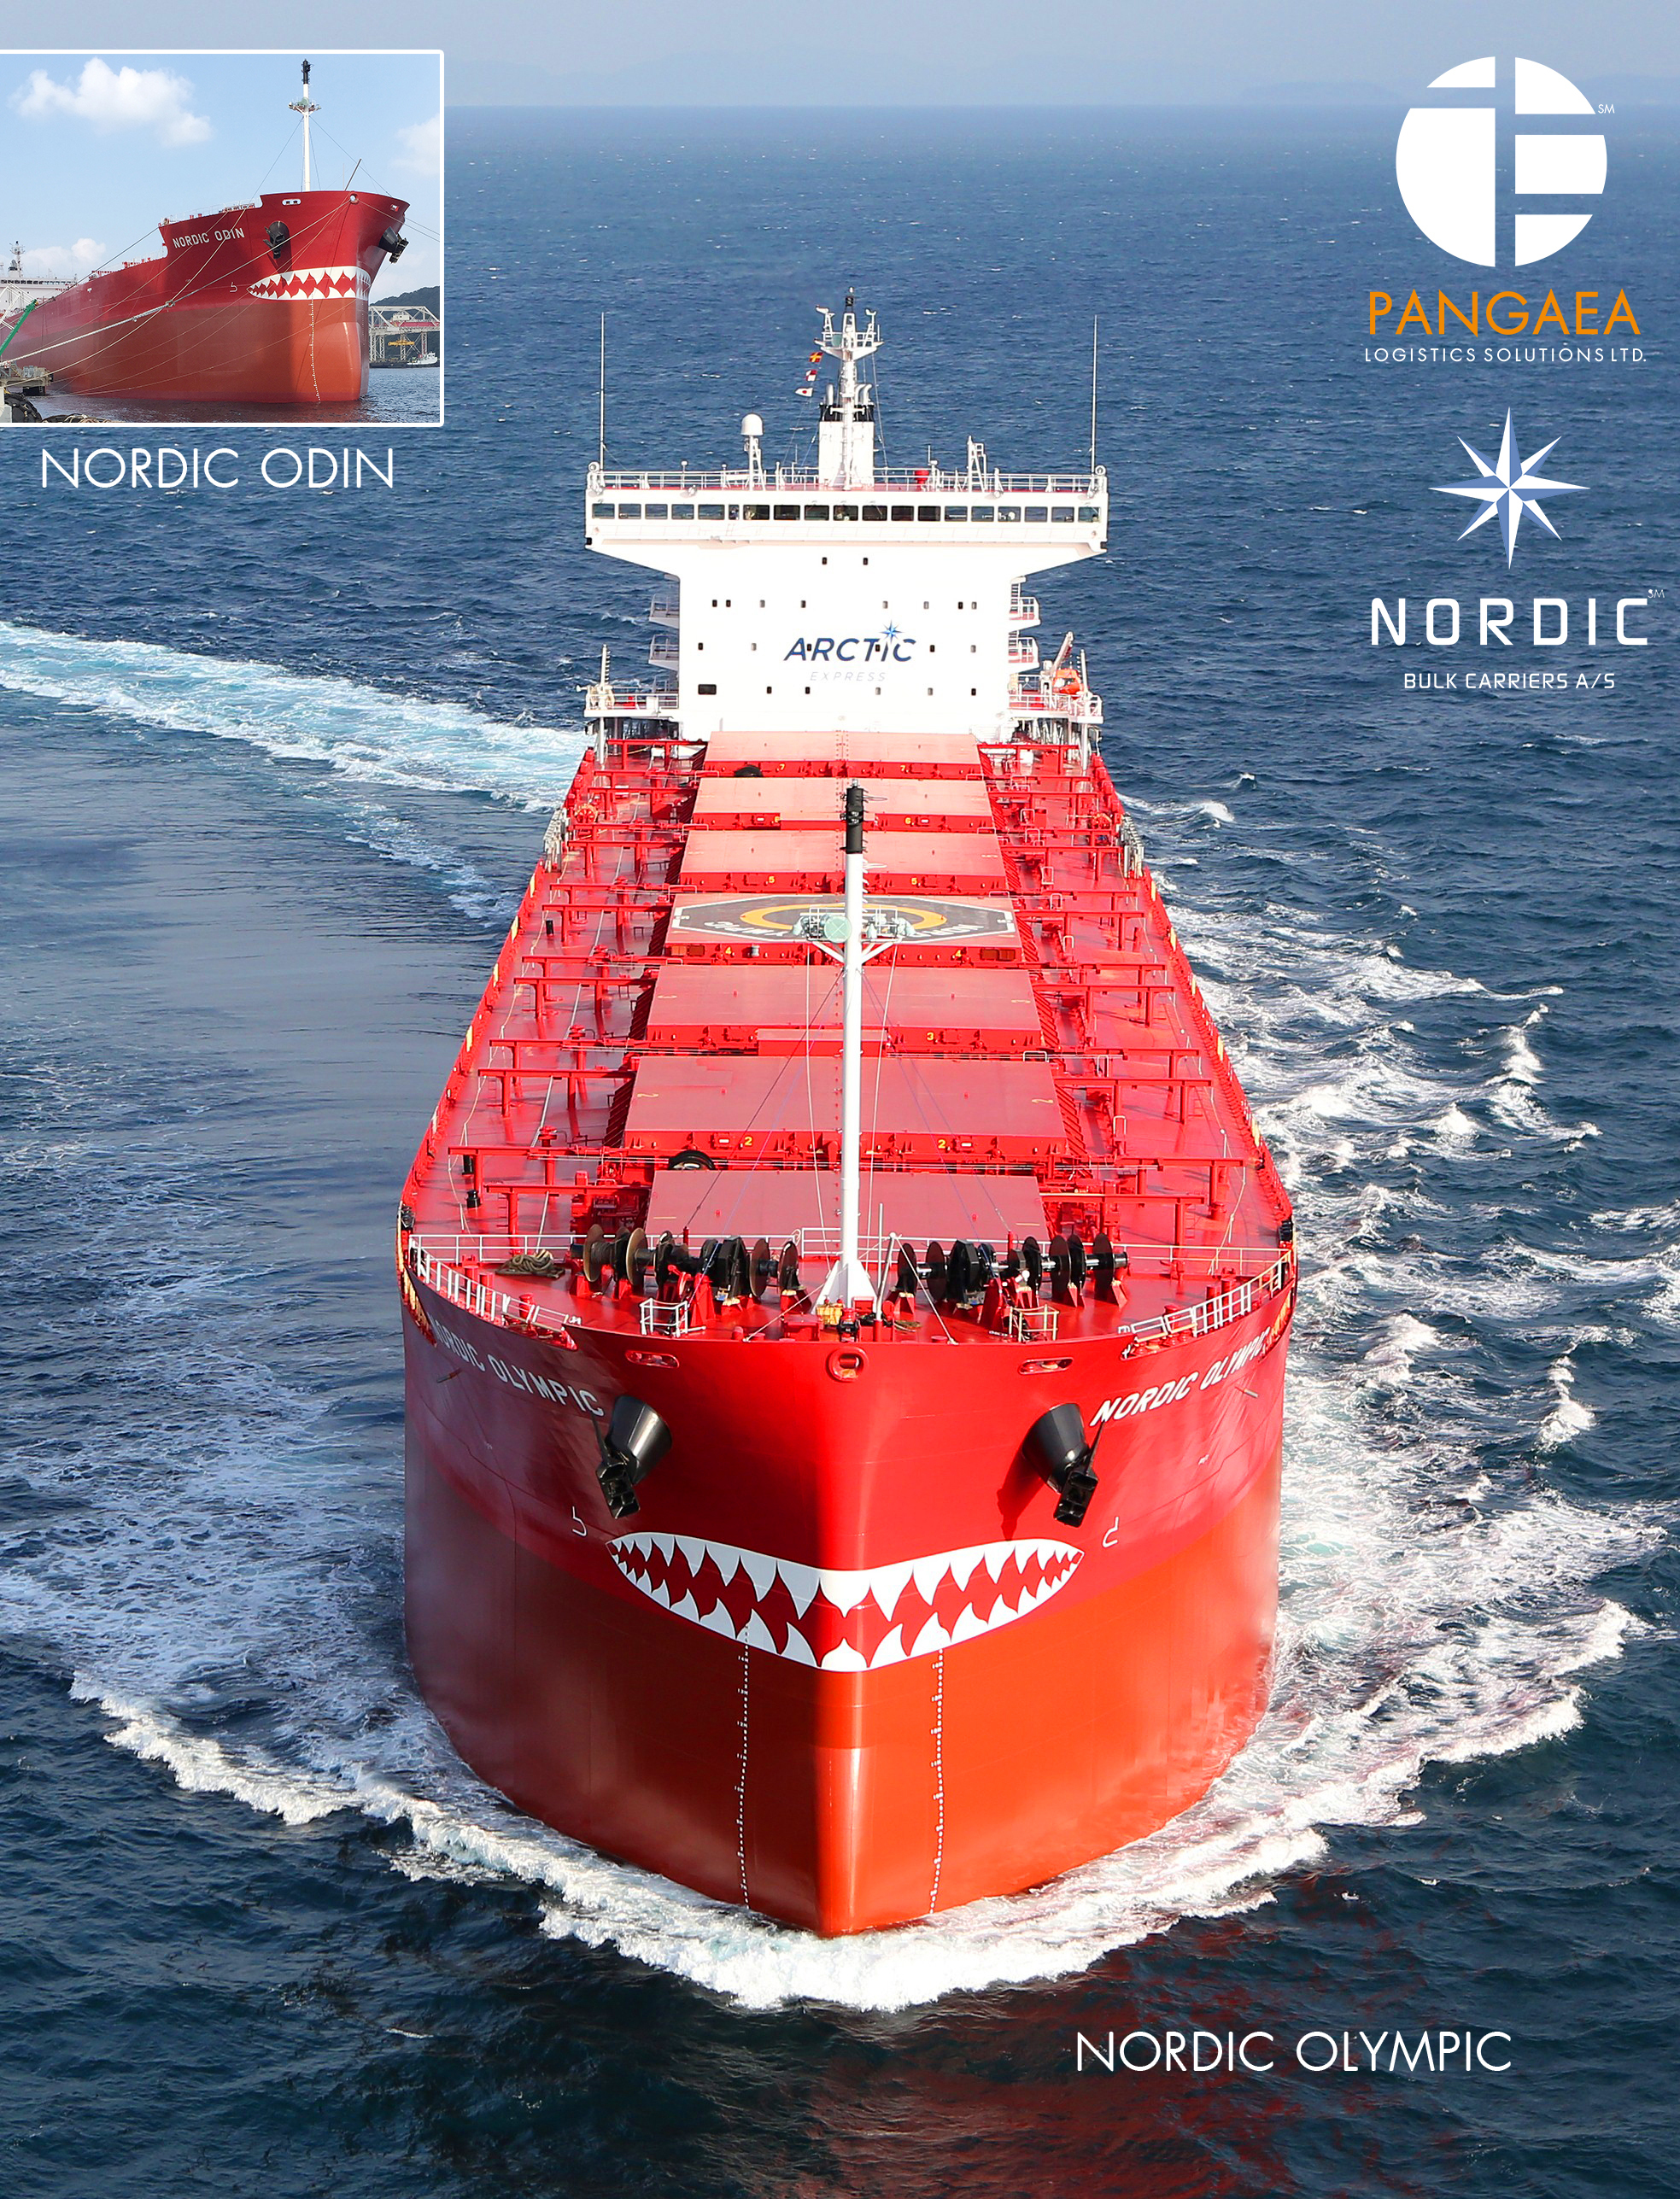 Pangaea Logistics Solutions Announces the Delivery of the 1A Ice-Class  Panamaxes Nordic Olympic and Nordic Odin